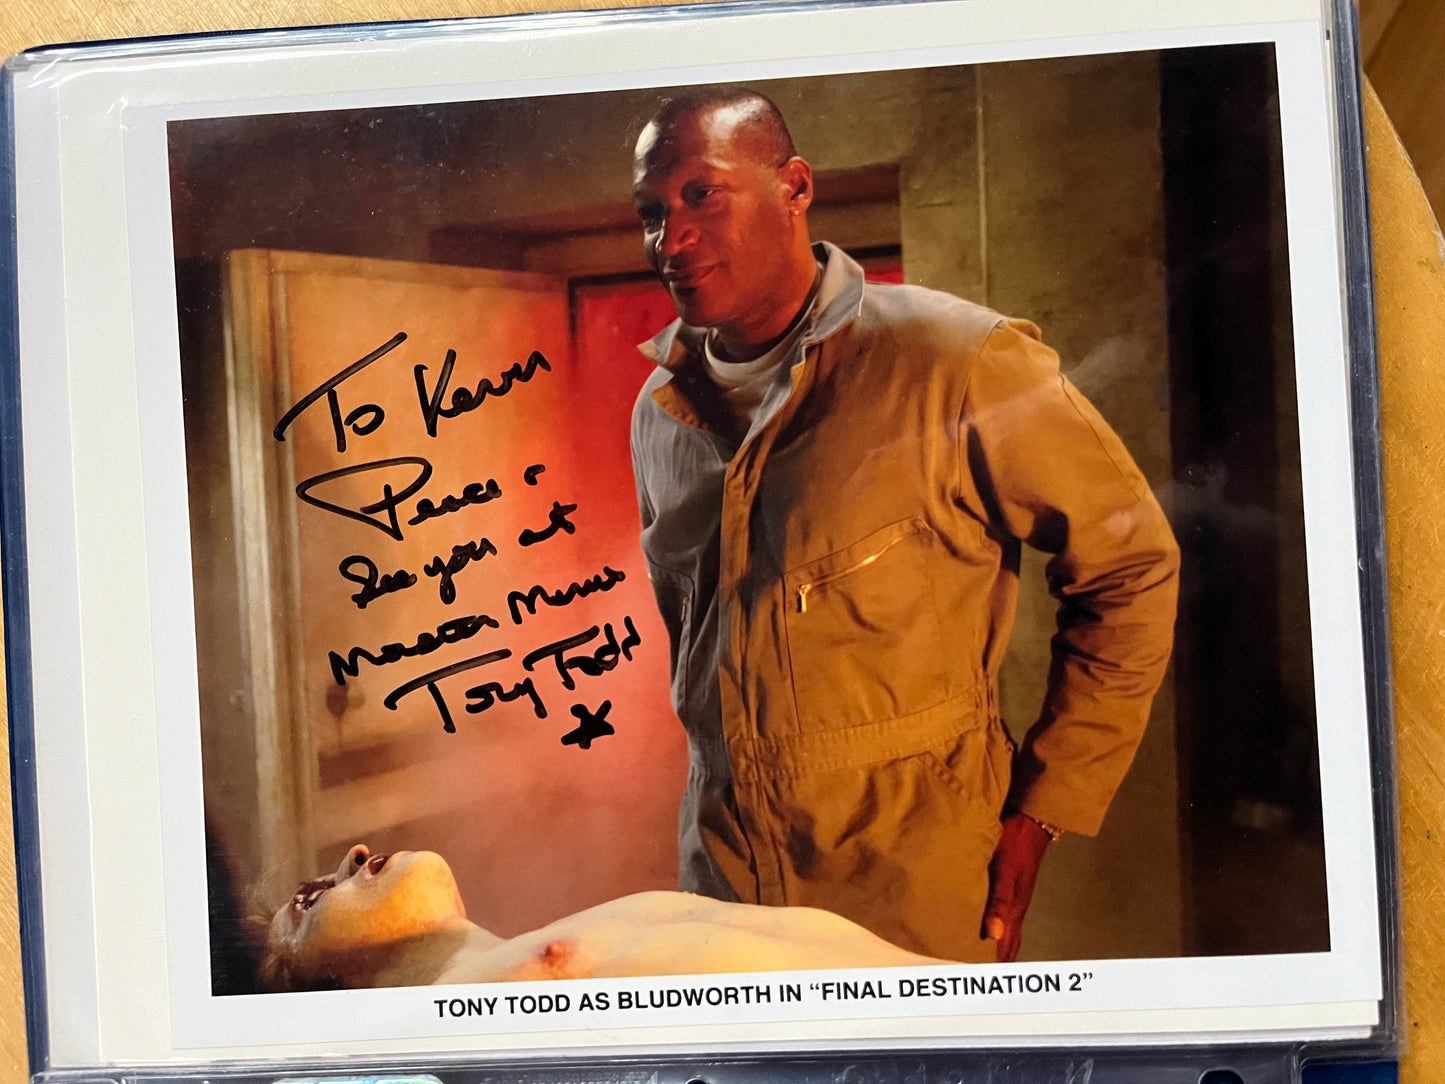 TONY TODD, actor from Final Destination 2, autograph